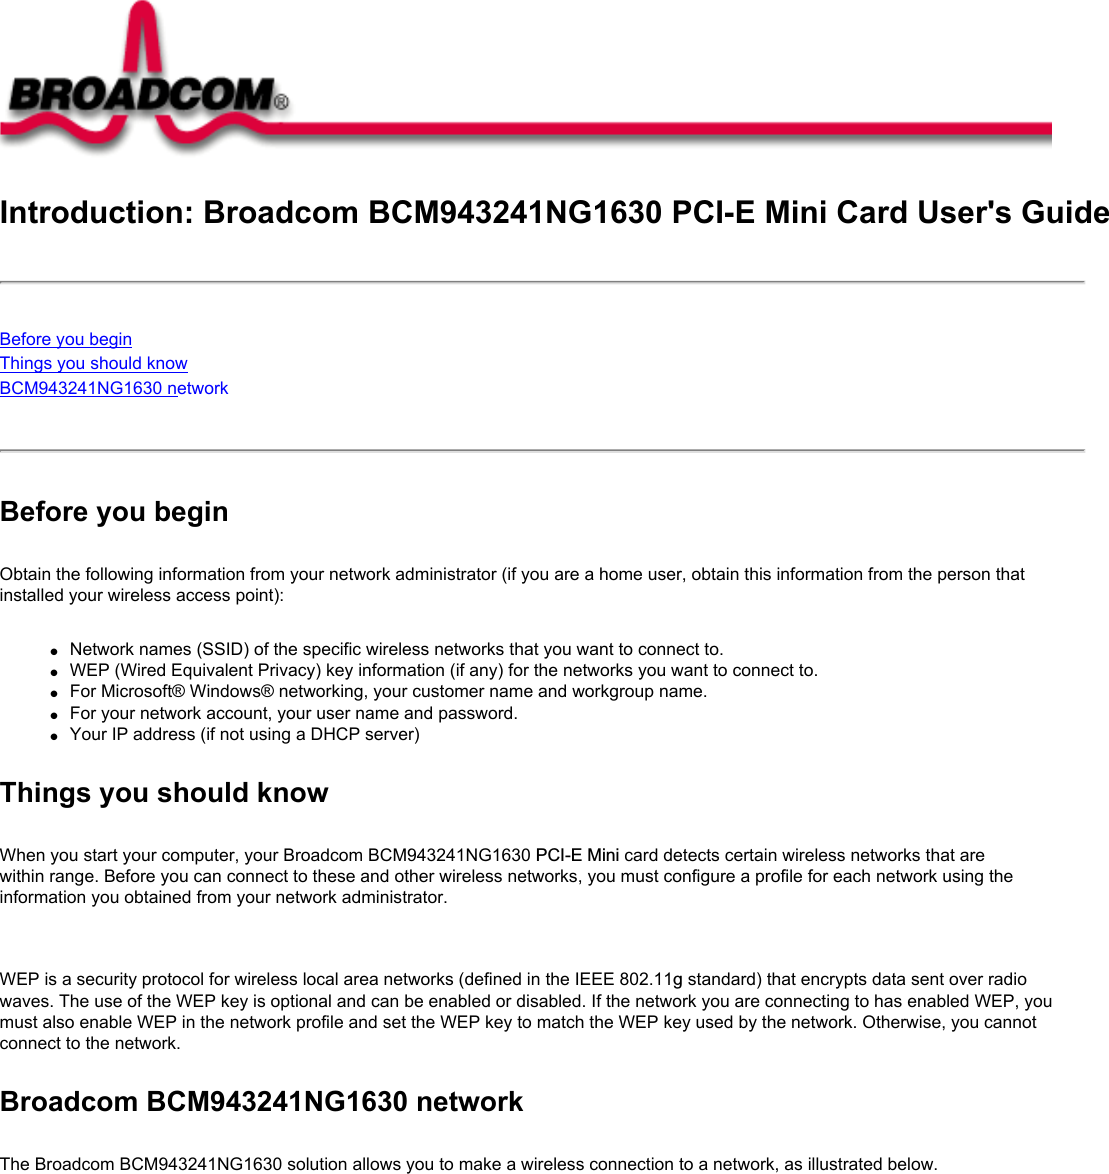 Introduction: Broadcom BCM943241NG1630 PCI-E Mini Card User&apos;s GuideBefore you beginThings you should knowBCM943241NG1630 network Before you beginObtain the following information from your network administrator (if you are a home user, obtain this information from the person that installed your wireless access point):●     Network names (SSID) of the specific wireless networks that you want to connect to.●     WEP (Wired Equivalent Privacy) key information (if any) for the networks you want to connect to.●     For Microsoft® Windows® networking, your customer name and workgroup name.●     For your network account, your user name and password.●     Your IP address (if not using a DHCP server)Things you should knowWhen you start your computer, your Broadcom BCM943241NG1630 PCI-E Mini card detects certain wireless networks that are within range. Before you can connect to these and other wireless networks, you must configure a profile for each network using the information you obtained from your network administrator.   WEP is a security protocol for wireless local area networks (defined in the IEEE 802.11g standard) that encrypts data sent over radio waves. The use of the WEP key is optional and can be enabled or disabled. If the network you are connecting to has enabled WEP, you must also enable WEP in the network profile and set the WEP key to match the WEP key used by the network. Otherwise, you cannot connect to the network.Broadcom BCM943241NG1630 networkThe Broadcom BCM943241NG1630 solution allows you to make a wireless connection to a network, as illustrated below.